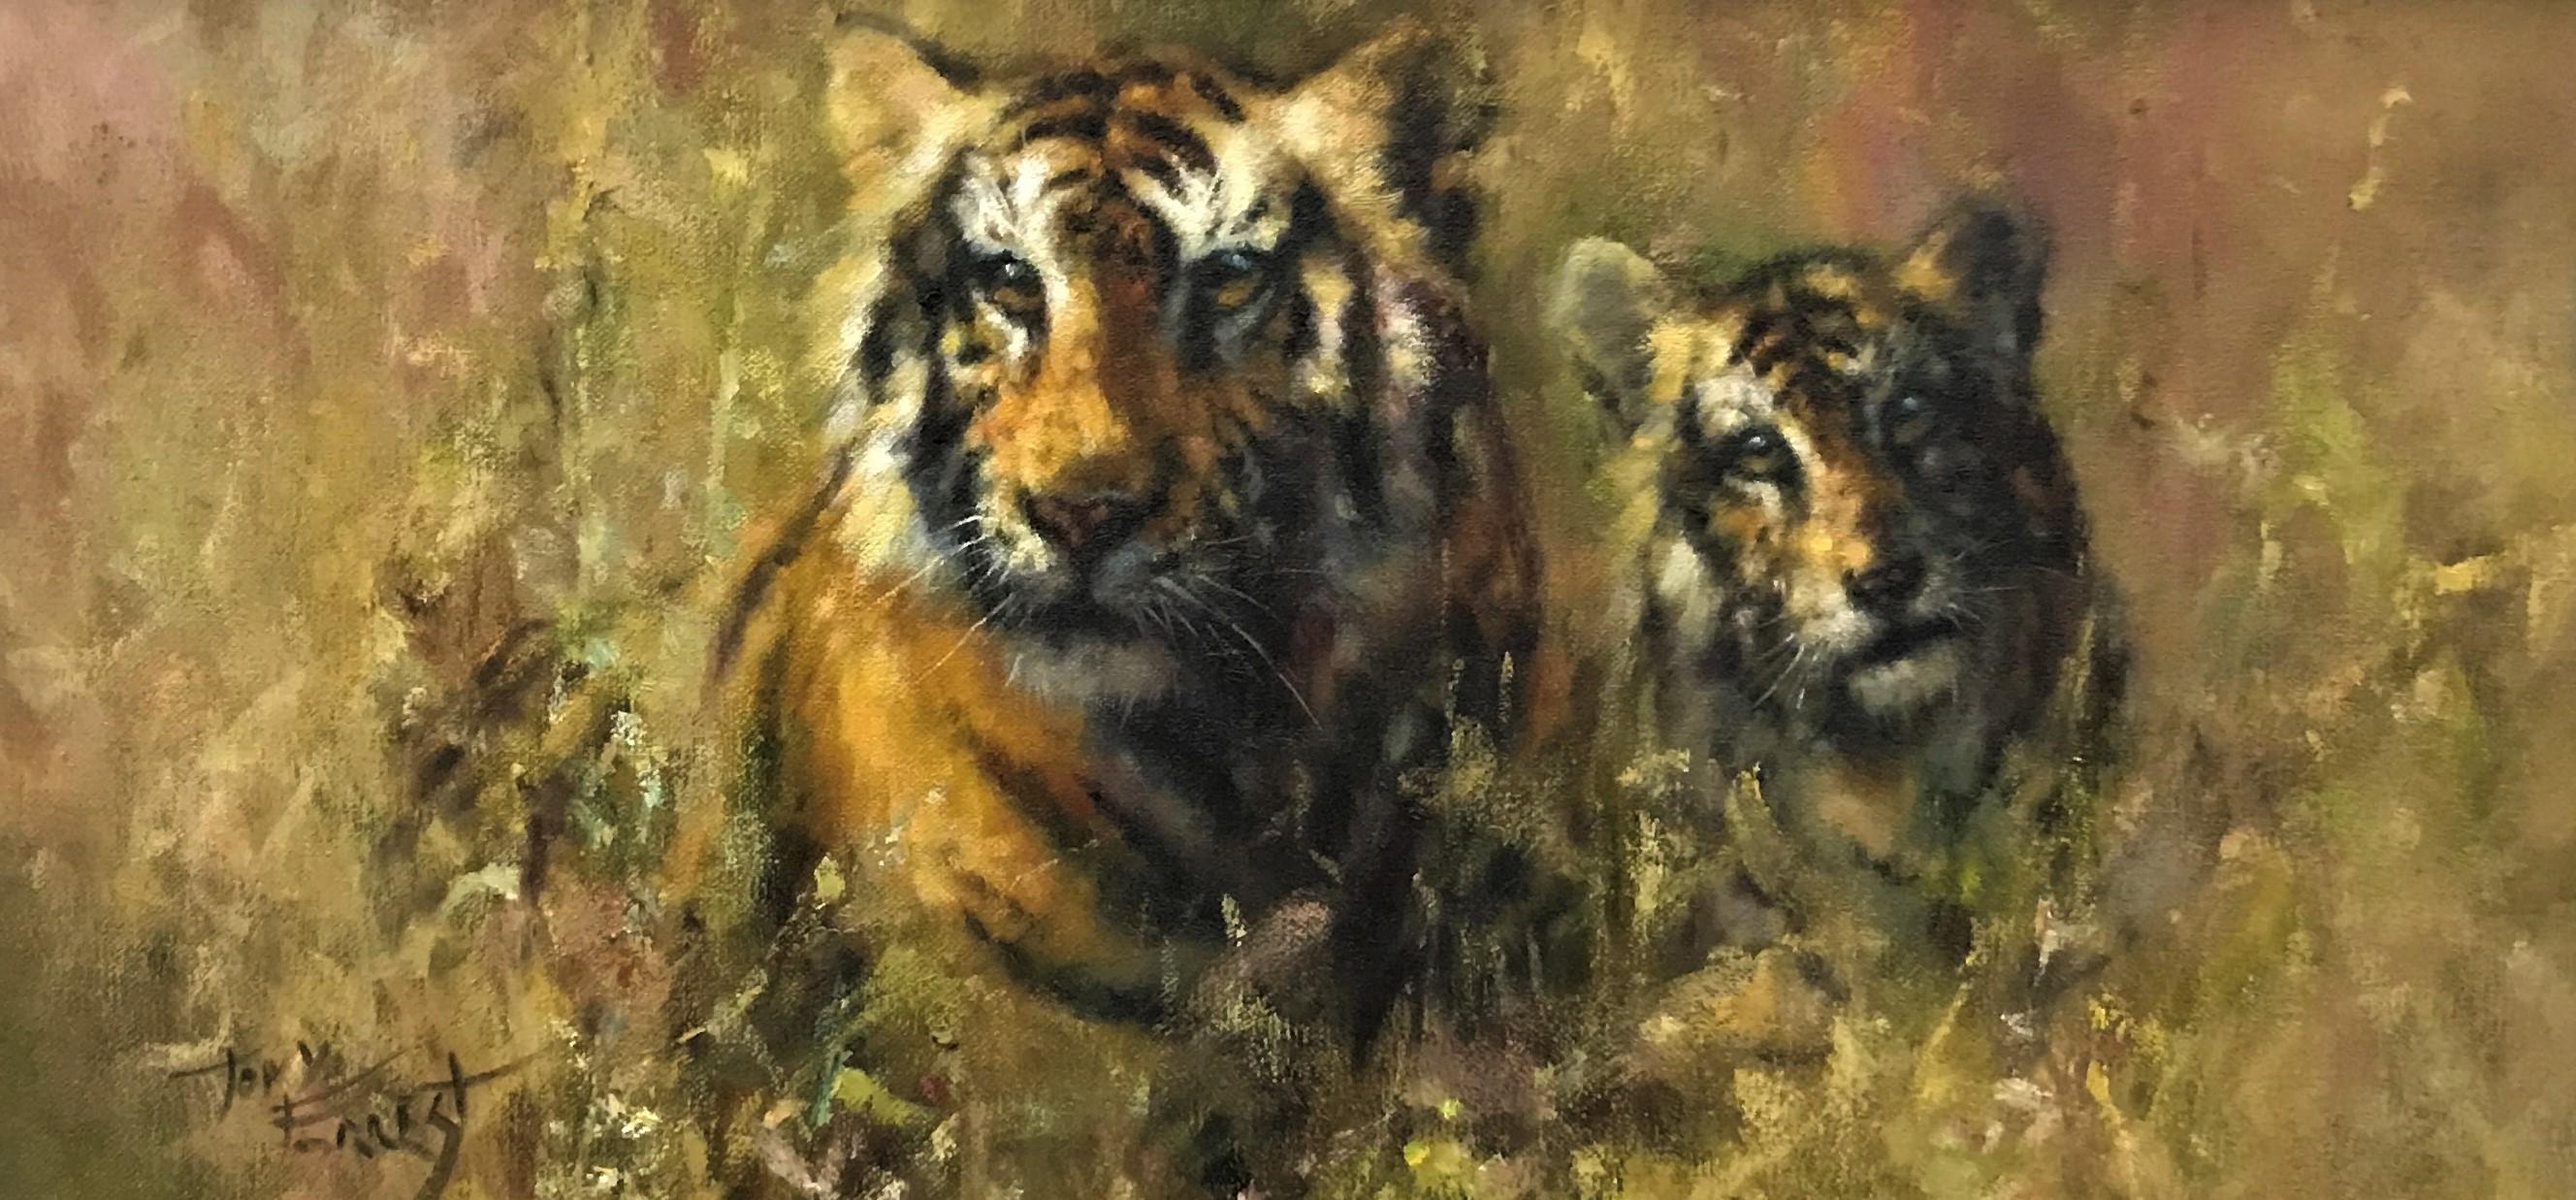 Tiger & Cub in grasses, oil on canvas, 20th C realist British painter